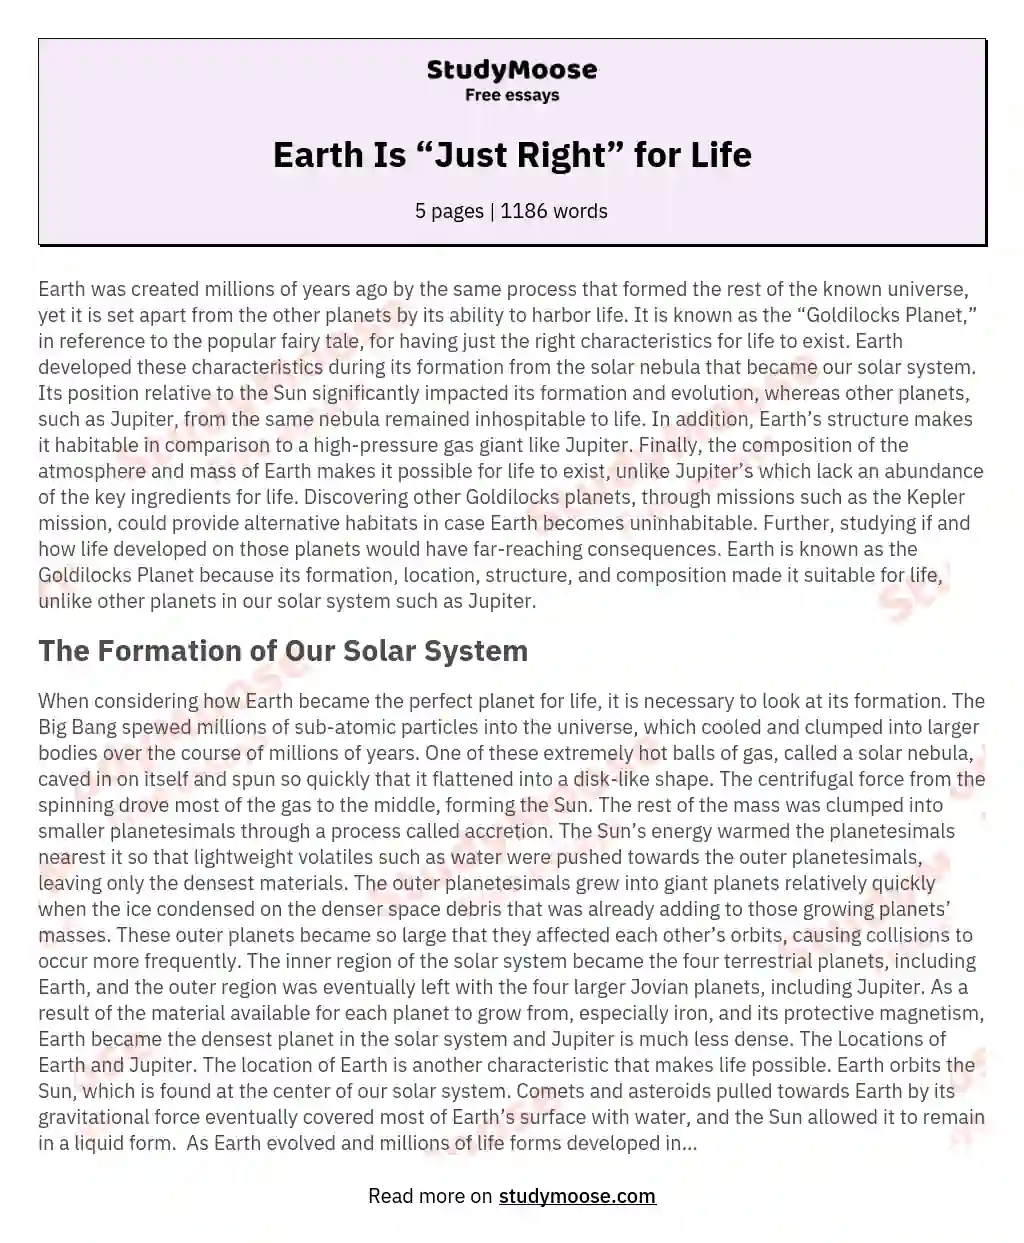 Earth Is “Just Right” for Life essay